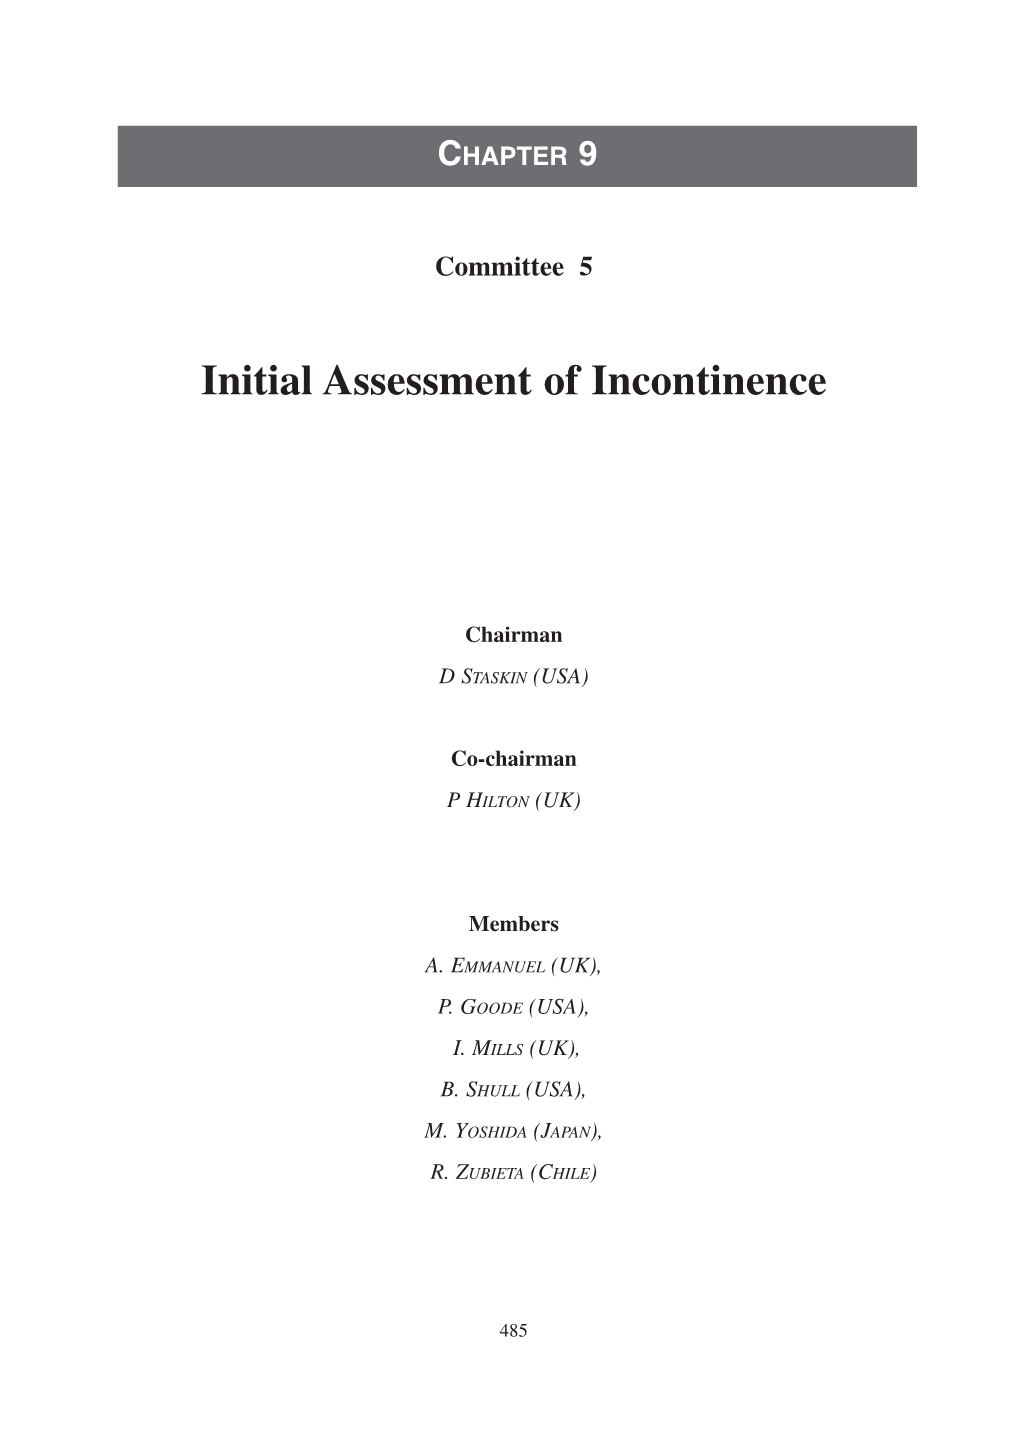 Initial Assessment of Incontinence